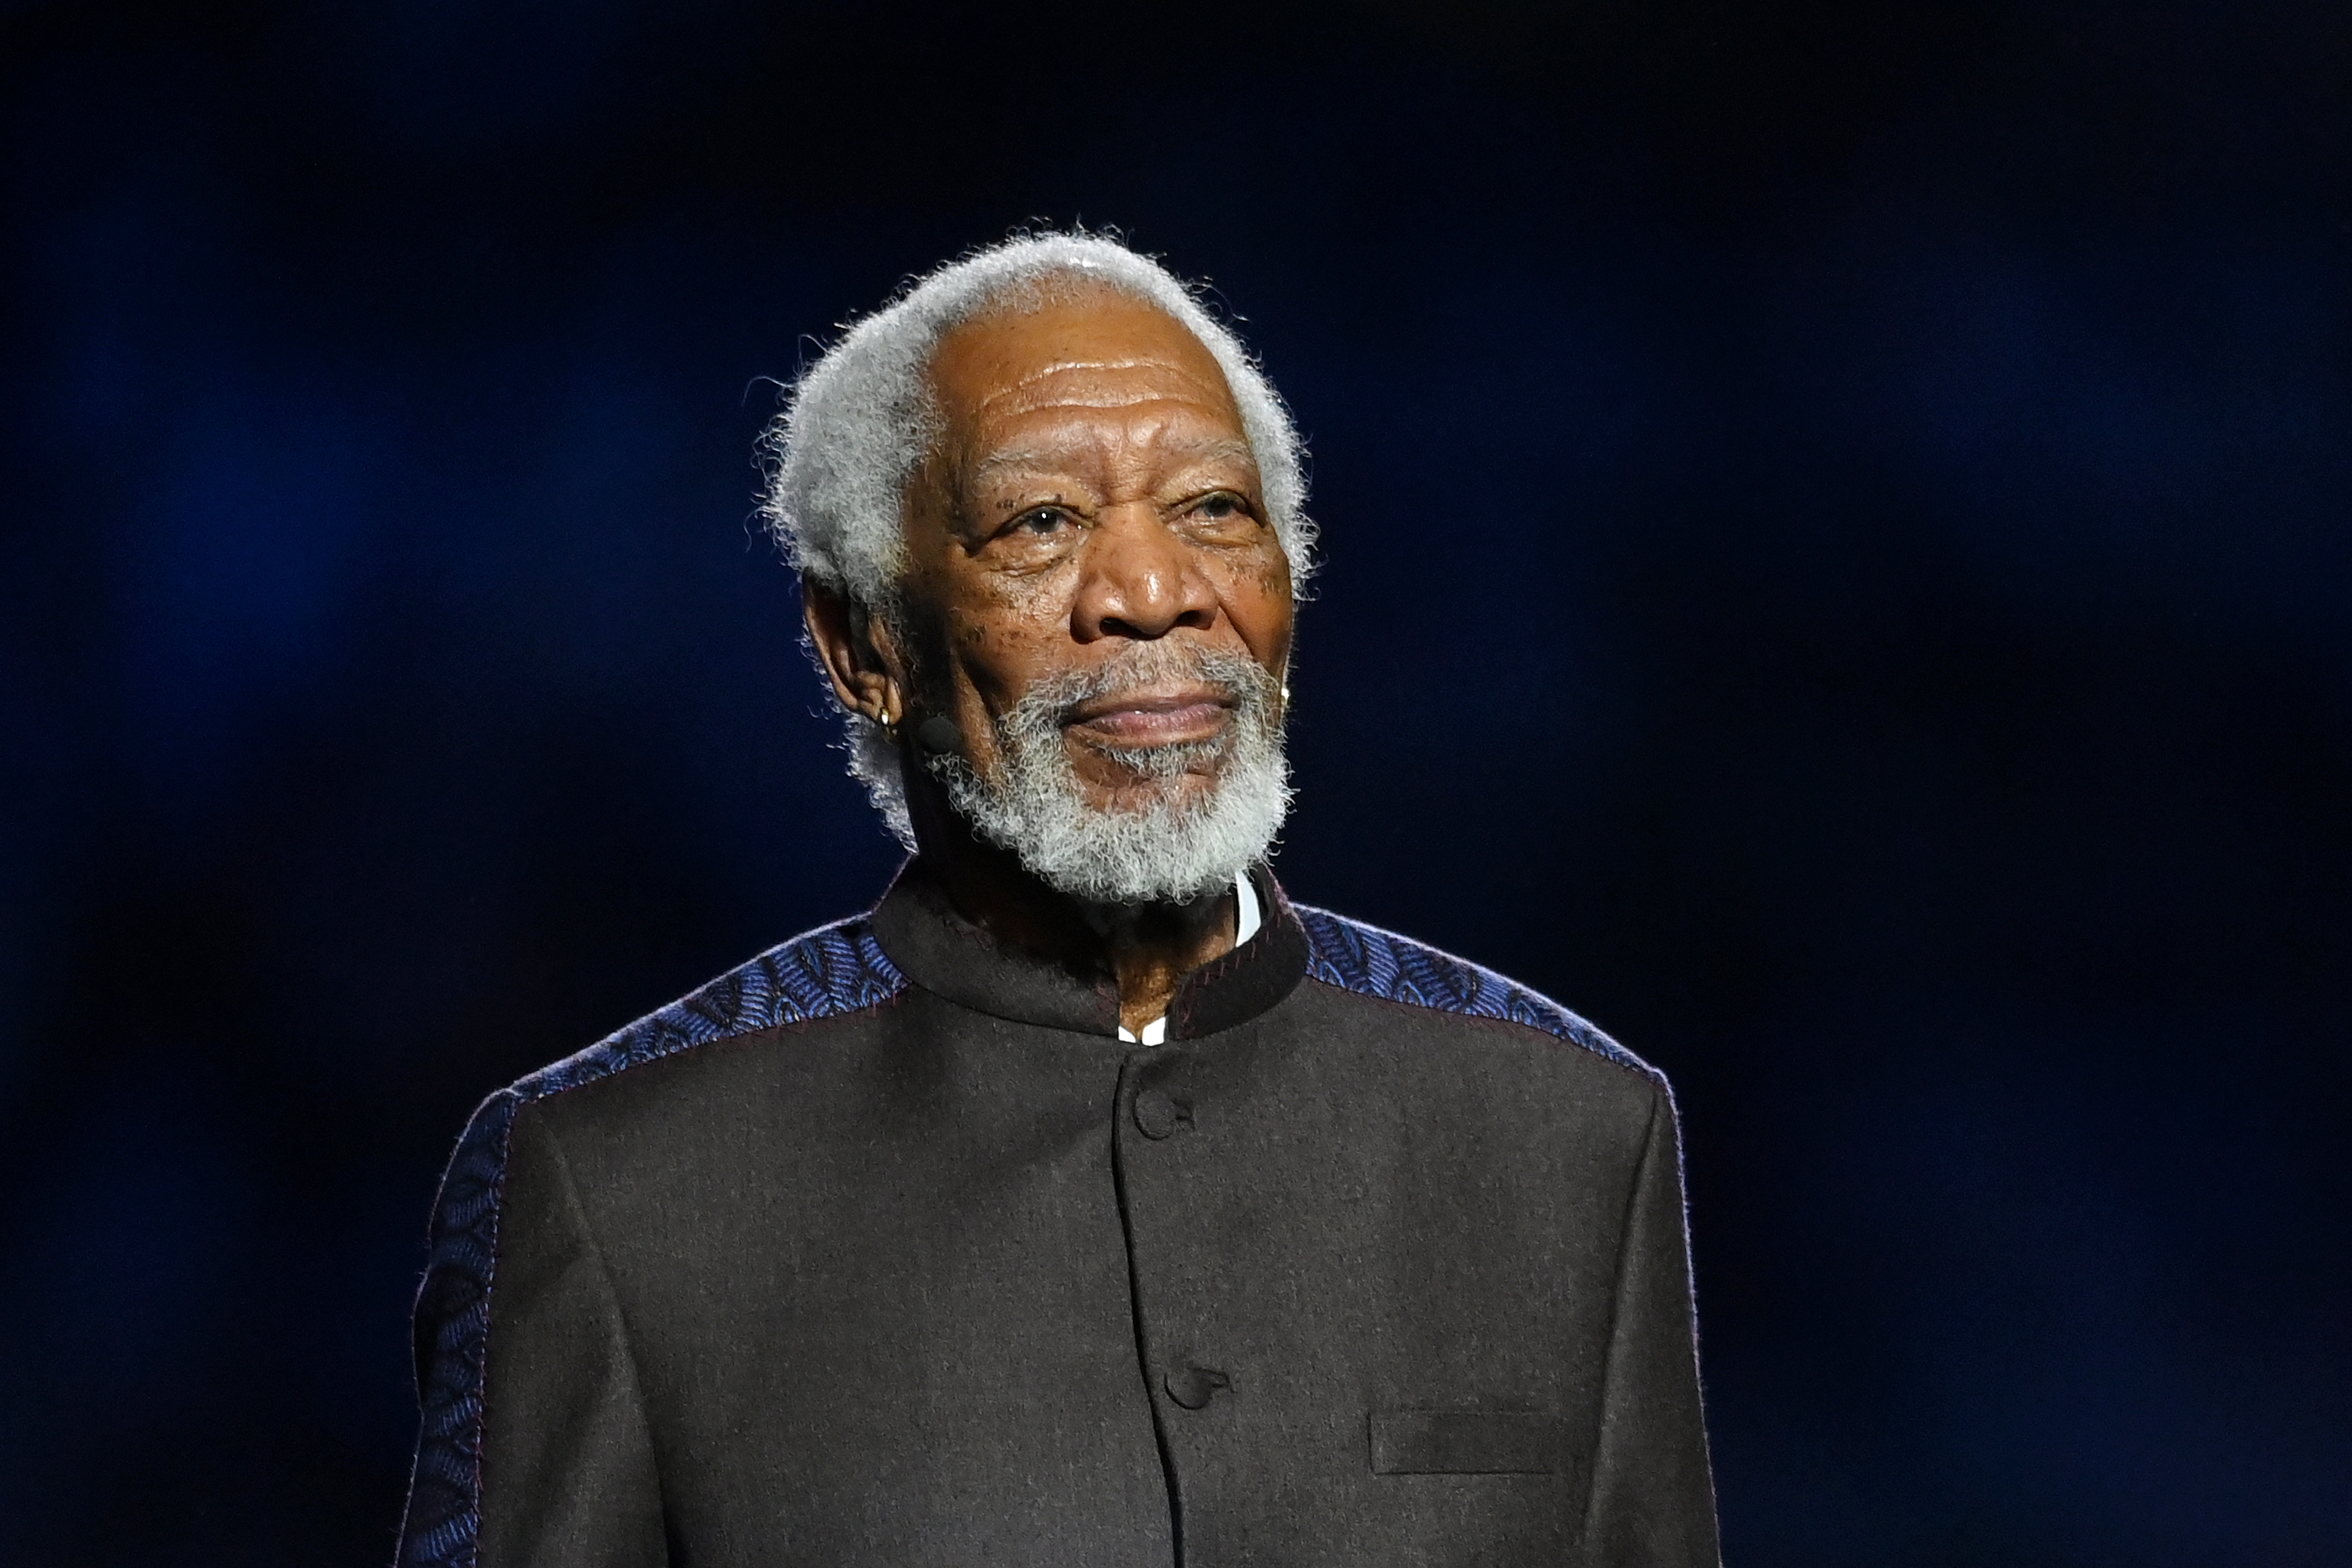 Morgan Freeman performs at the FIFA World Cup Qatar 2022 Group opening ceremony | Source: Getty Images